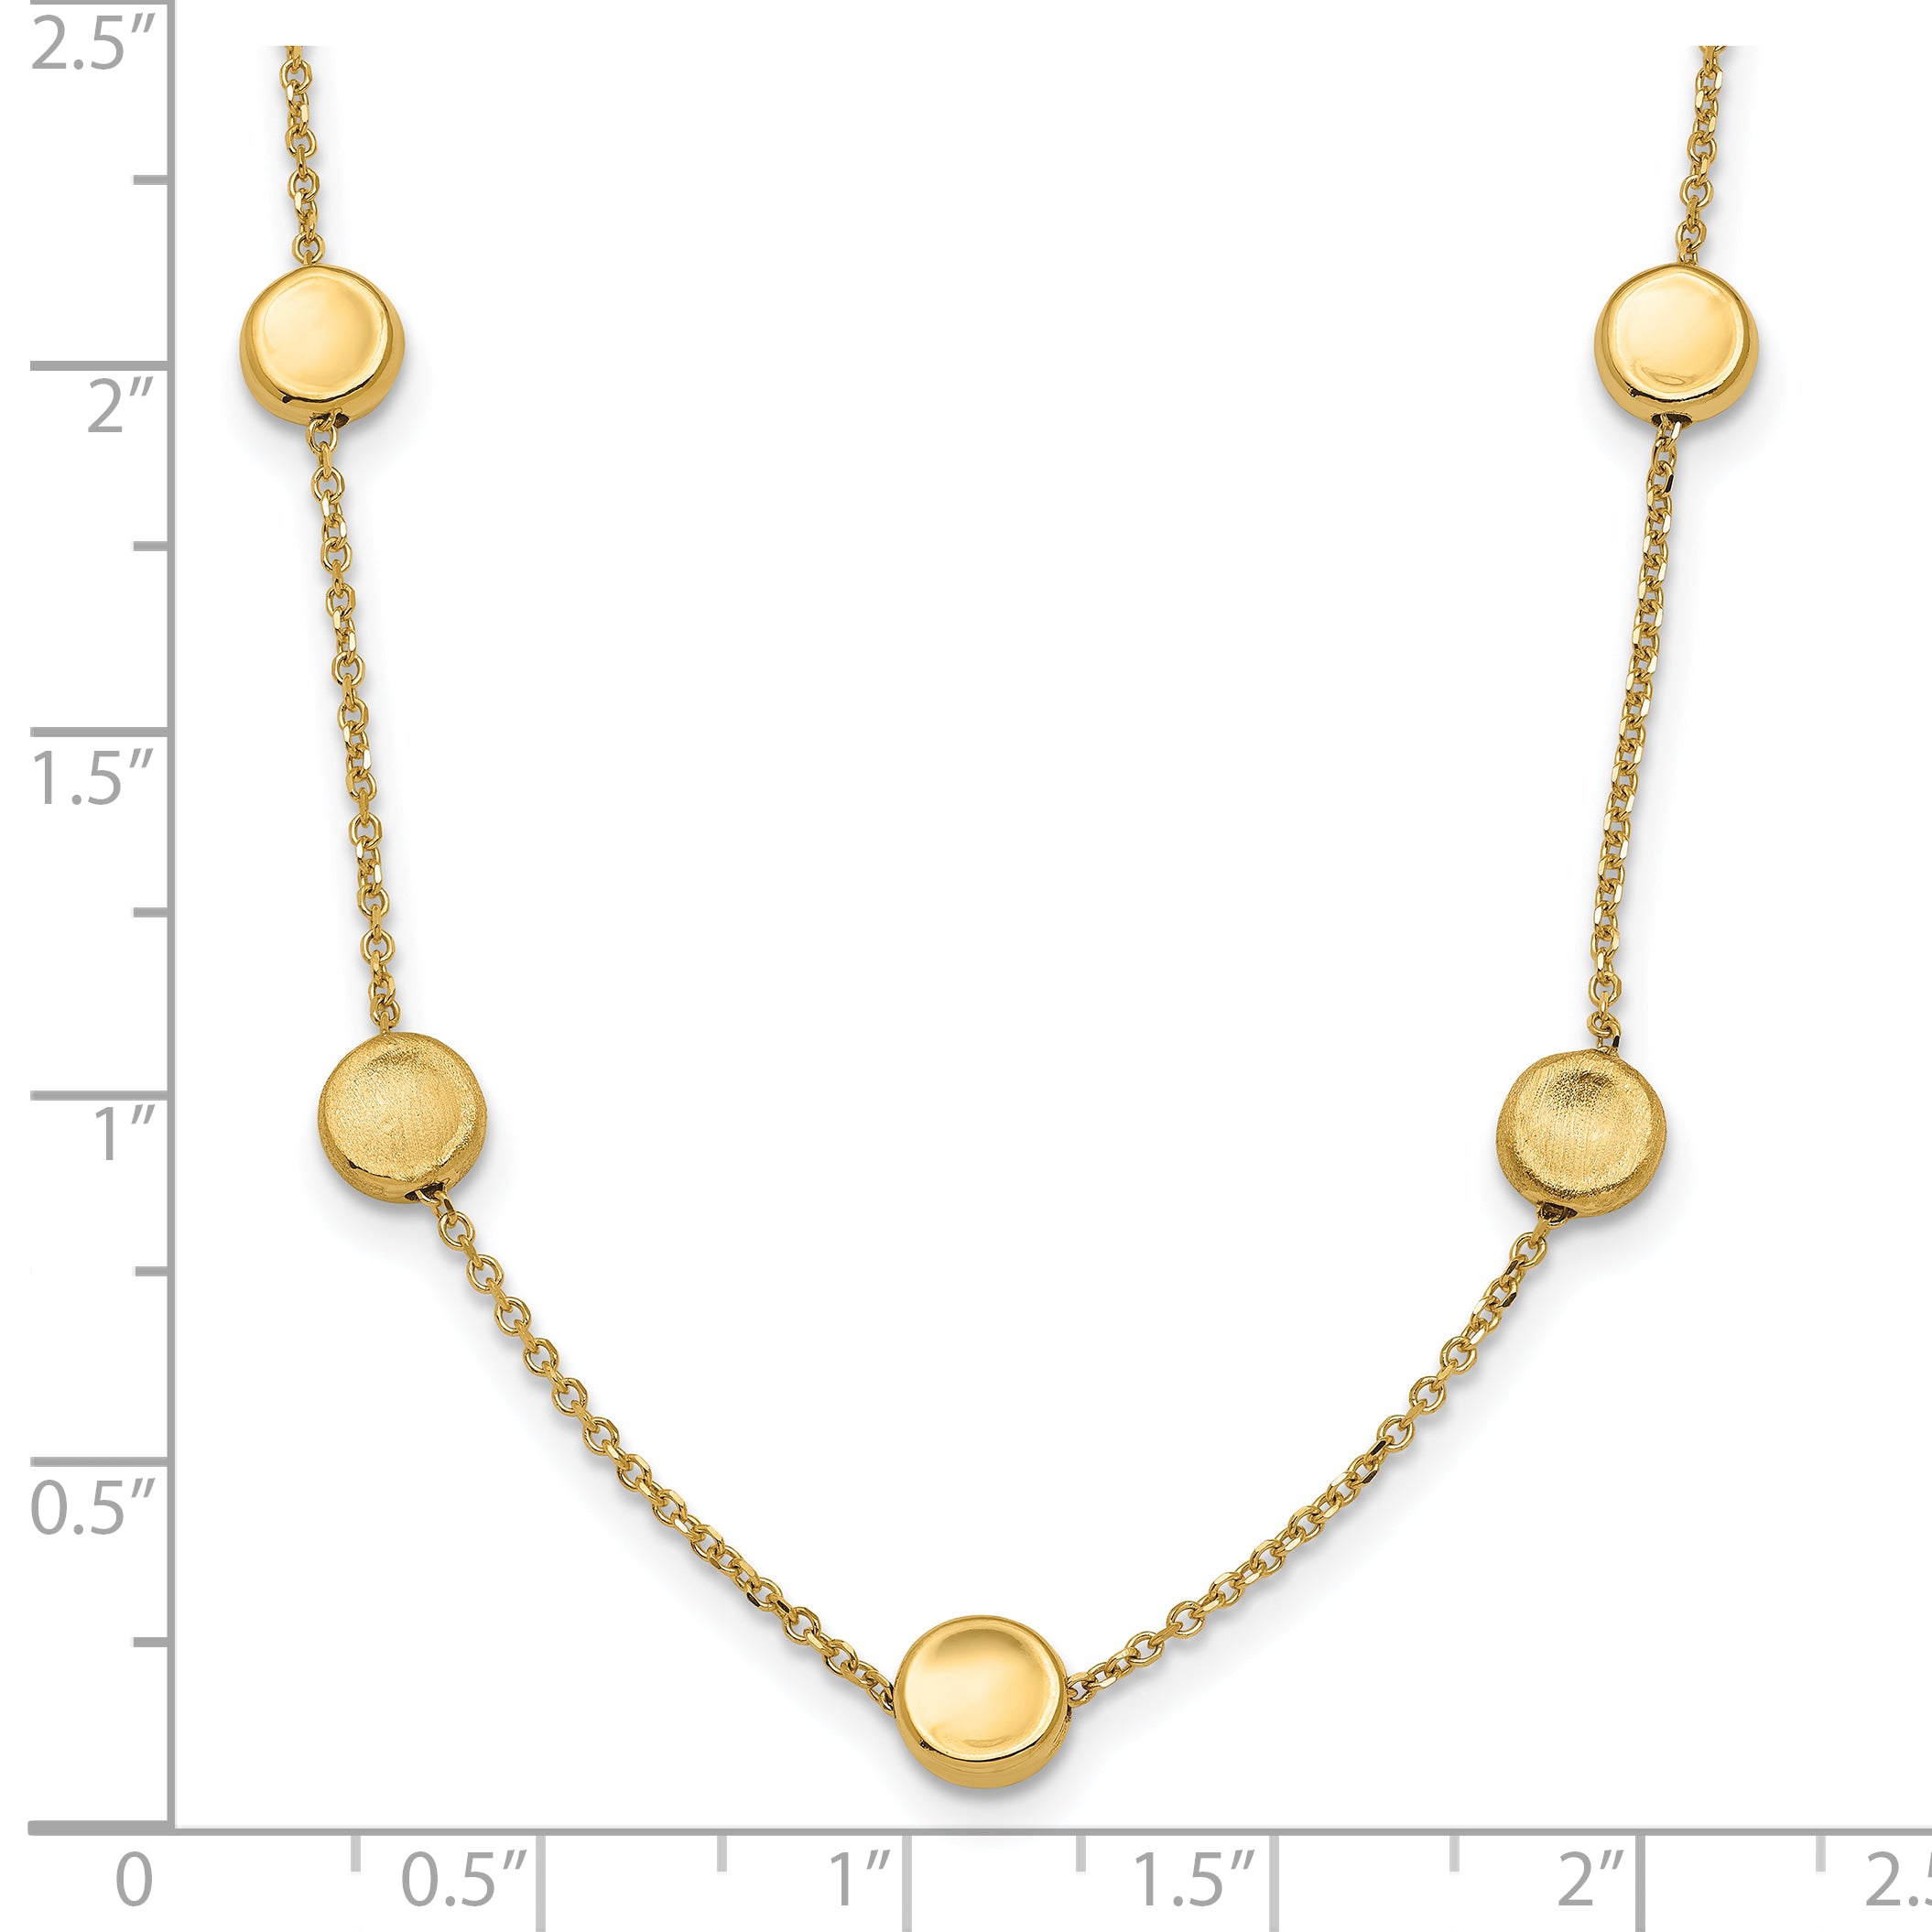 14K Polished and Satin Beaded Necklace